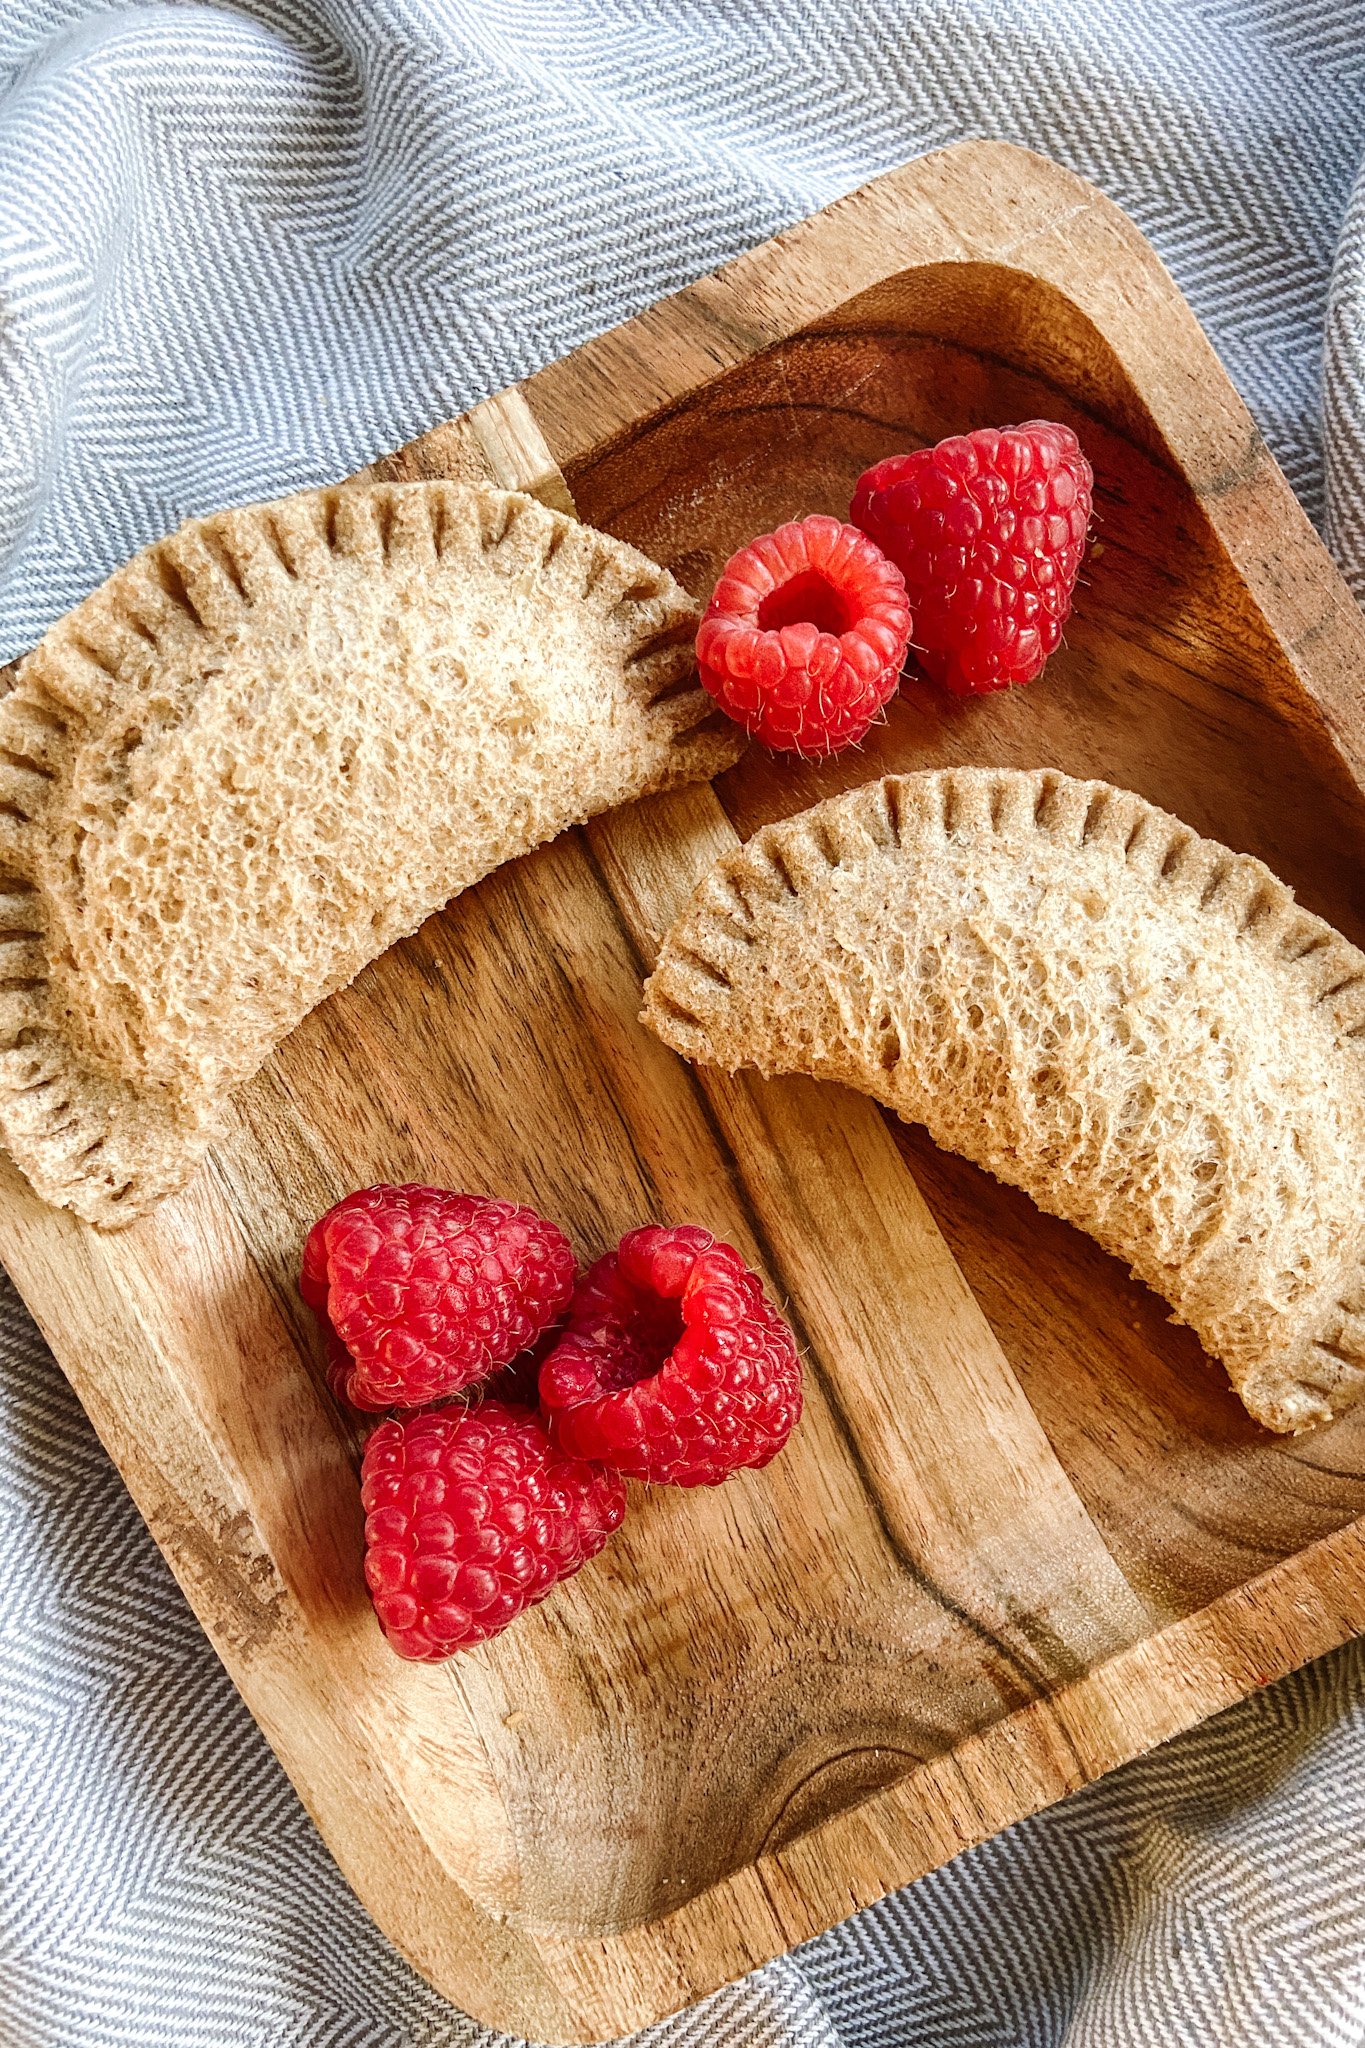 Peanut butter and empanada sandwiches. Served with a side of raspberries.